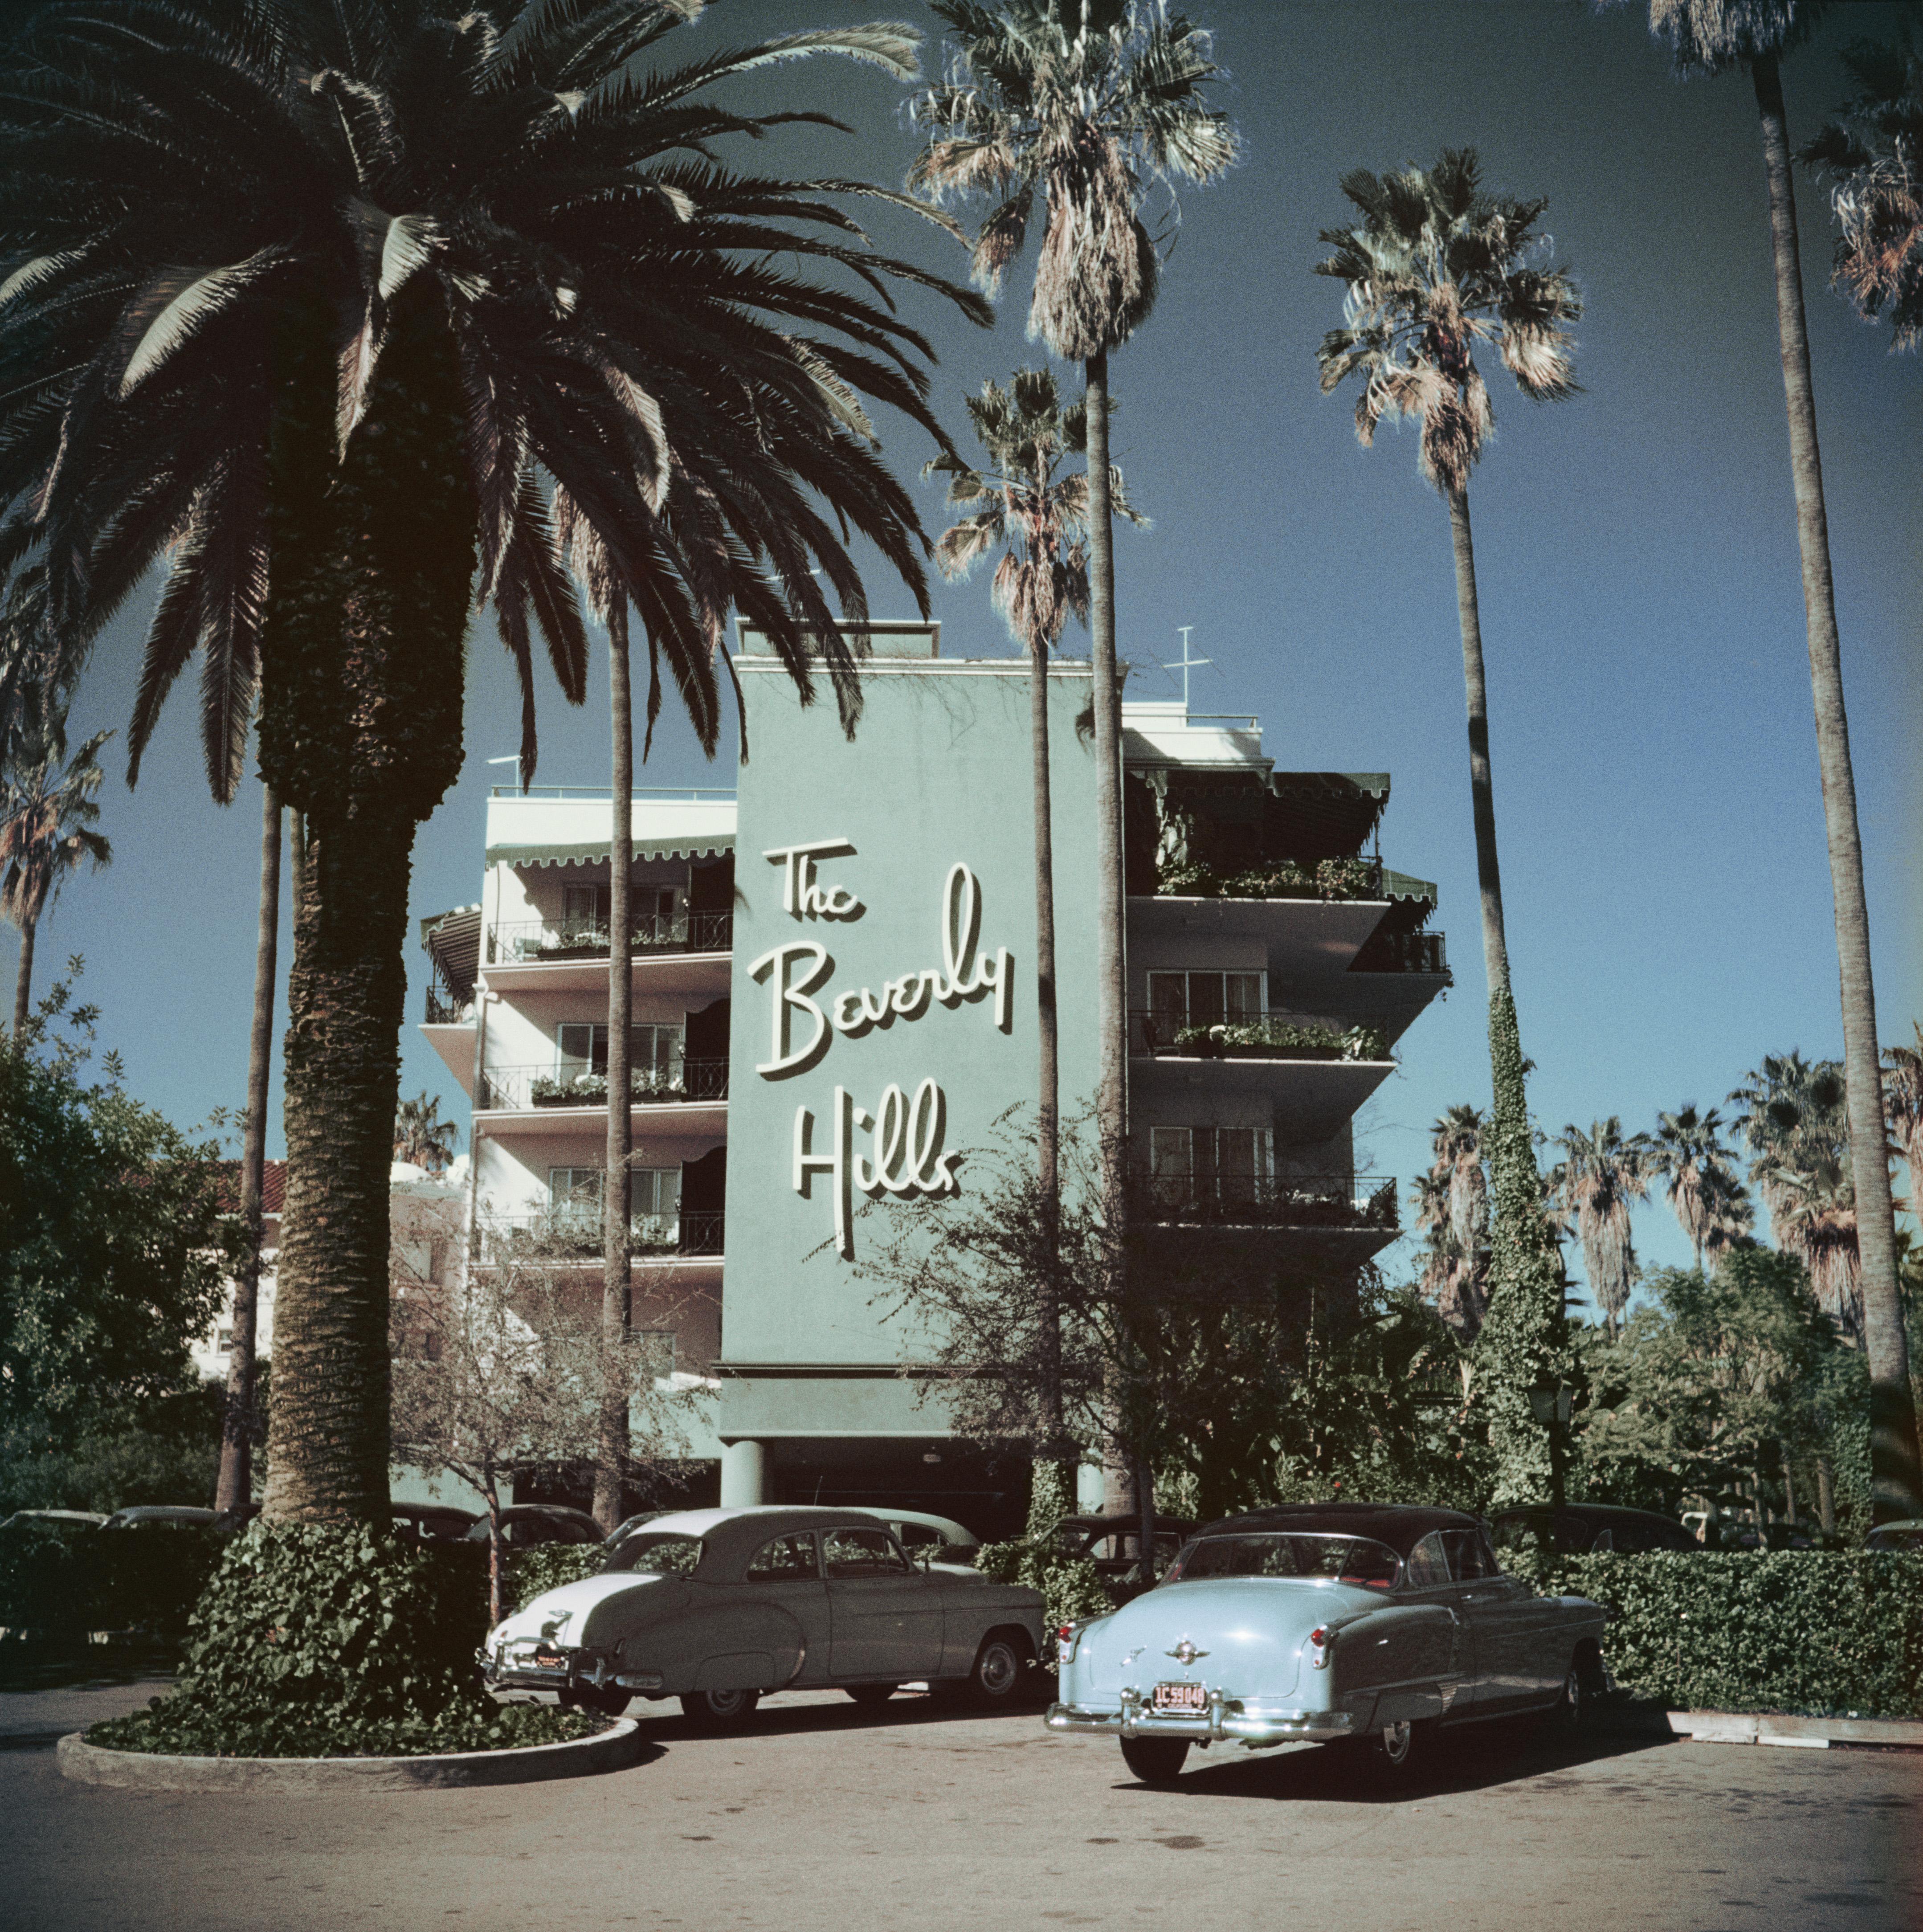 'Beverly Hills Hotel' 1957 Slim Aarons Limited Edition Estate Stamped Print

Cars parked outside the Beverly Hills Hotel on Sunset Boulevard in California, 1957. (Photo by Slim Aarons)

C Print
Produced from the original transparency
Certificate of